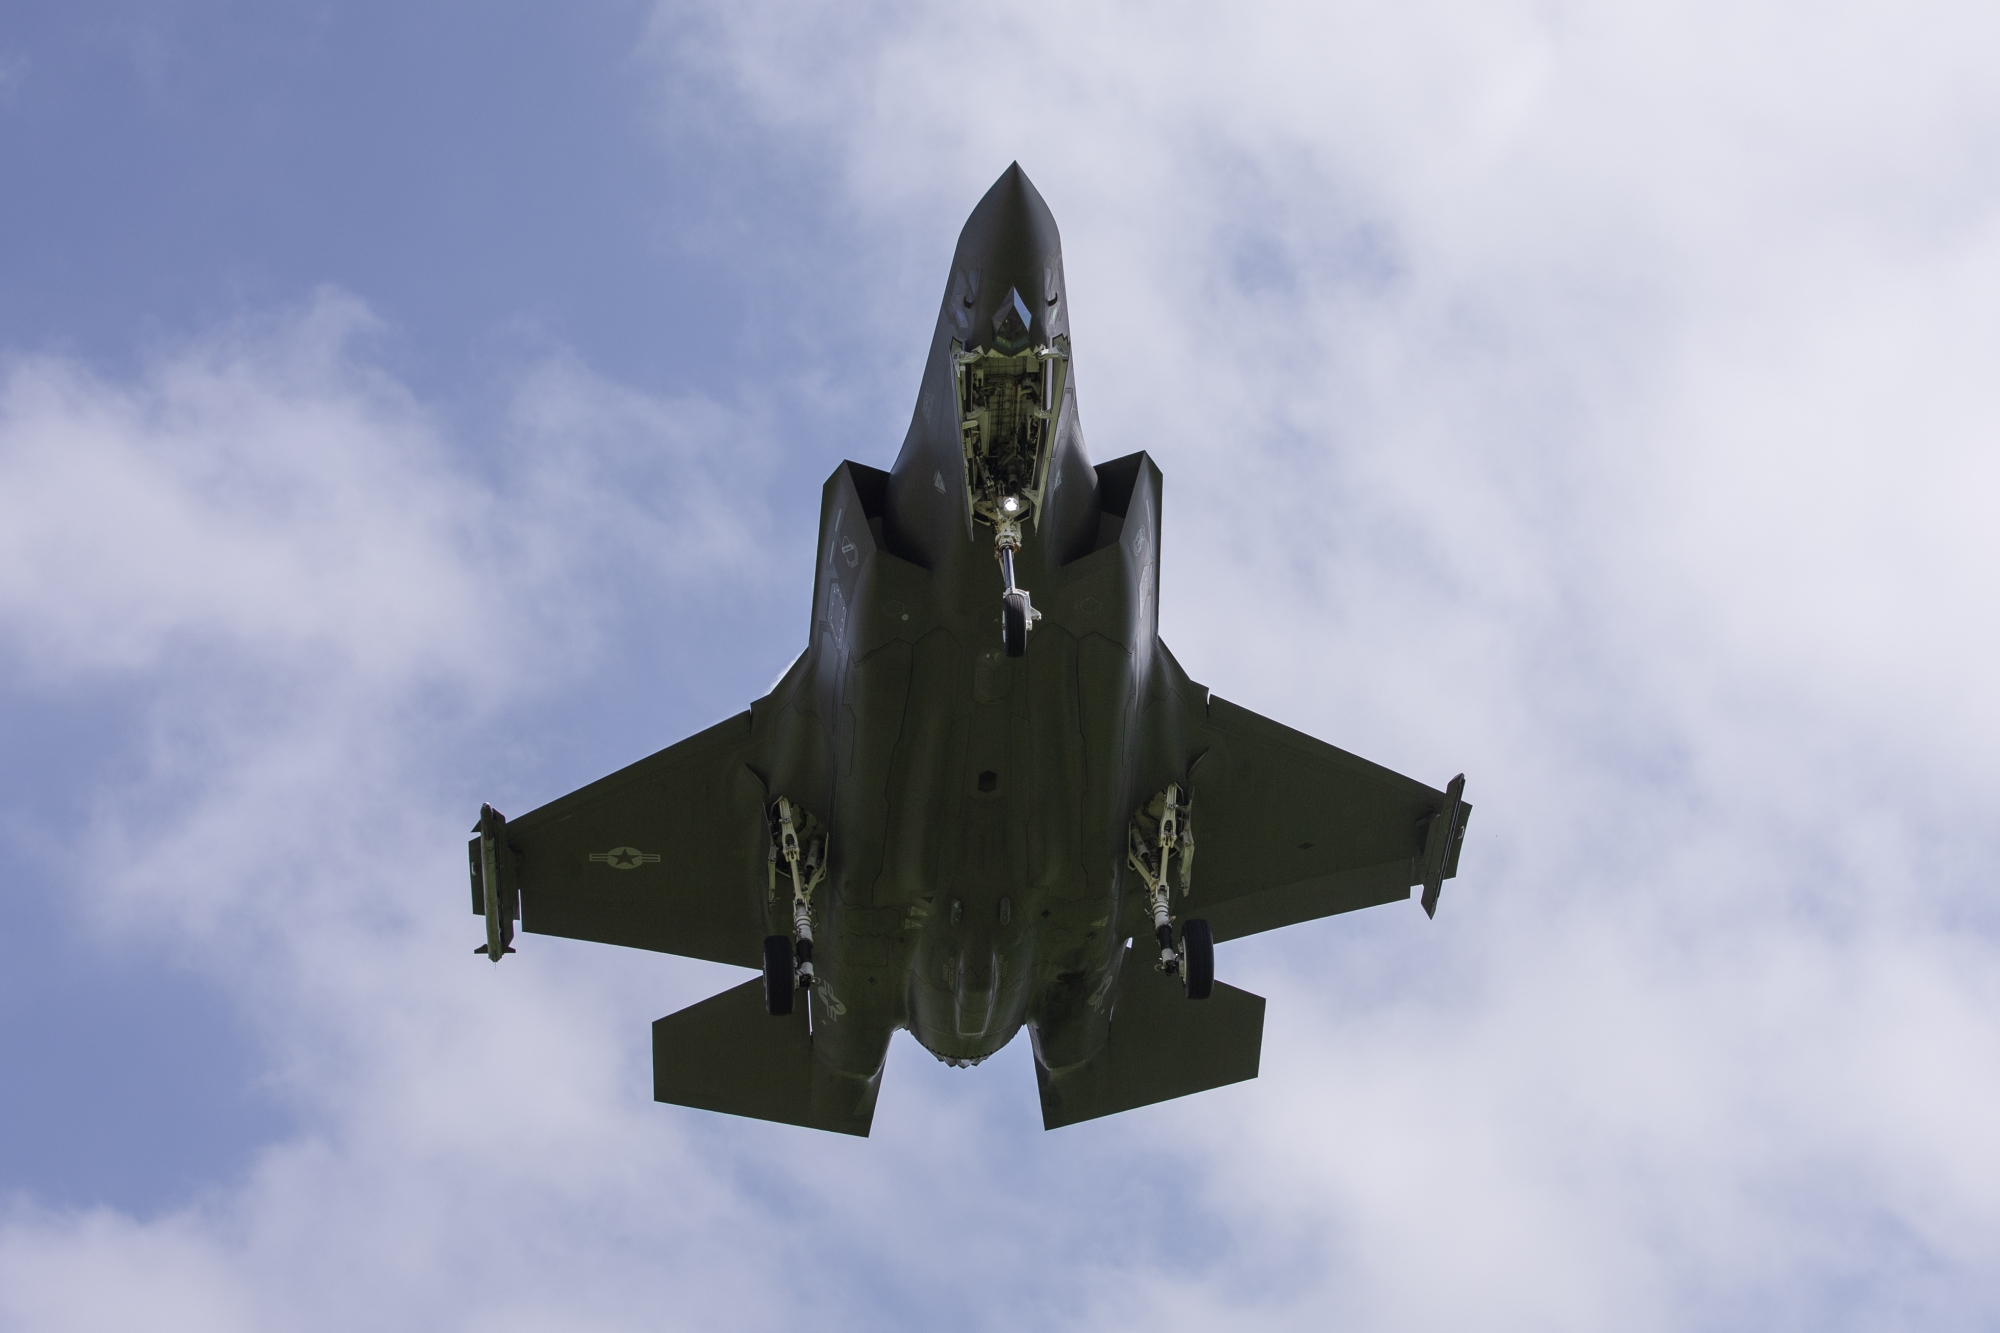 A Lockheed Martin F-35A fighter jet is pictured during a test and evaluation day at the Swiss Army airbase, in Payerne, Switzerland, Friday, June 7, 2019. (KEYSTONE/Peter Klaunzer)